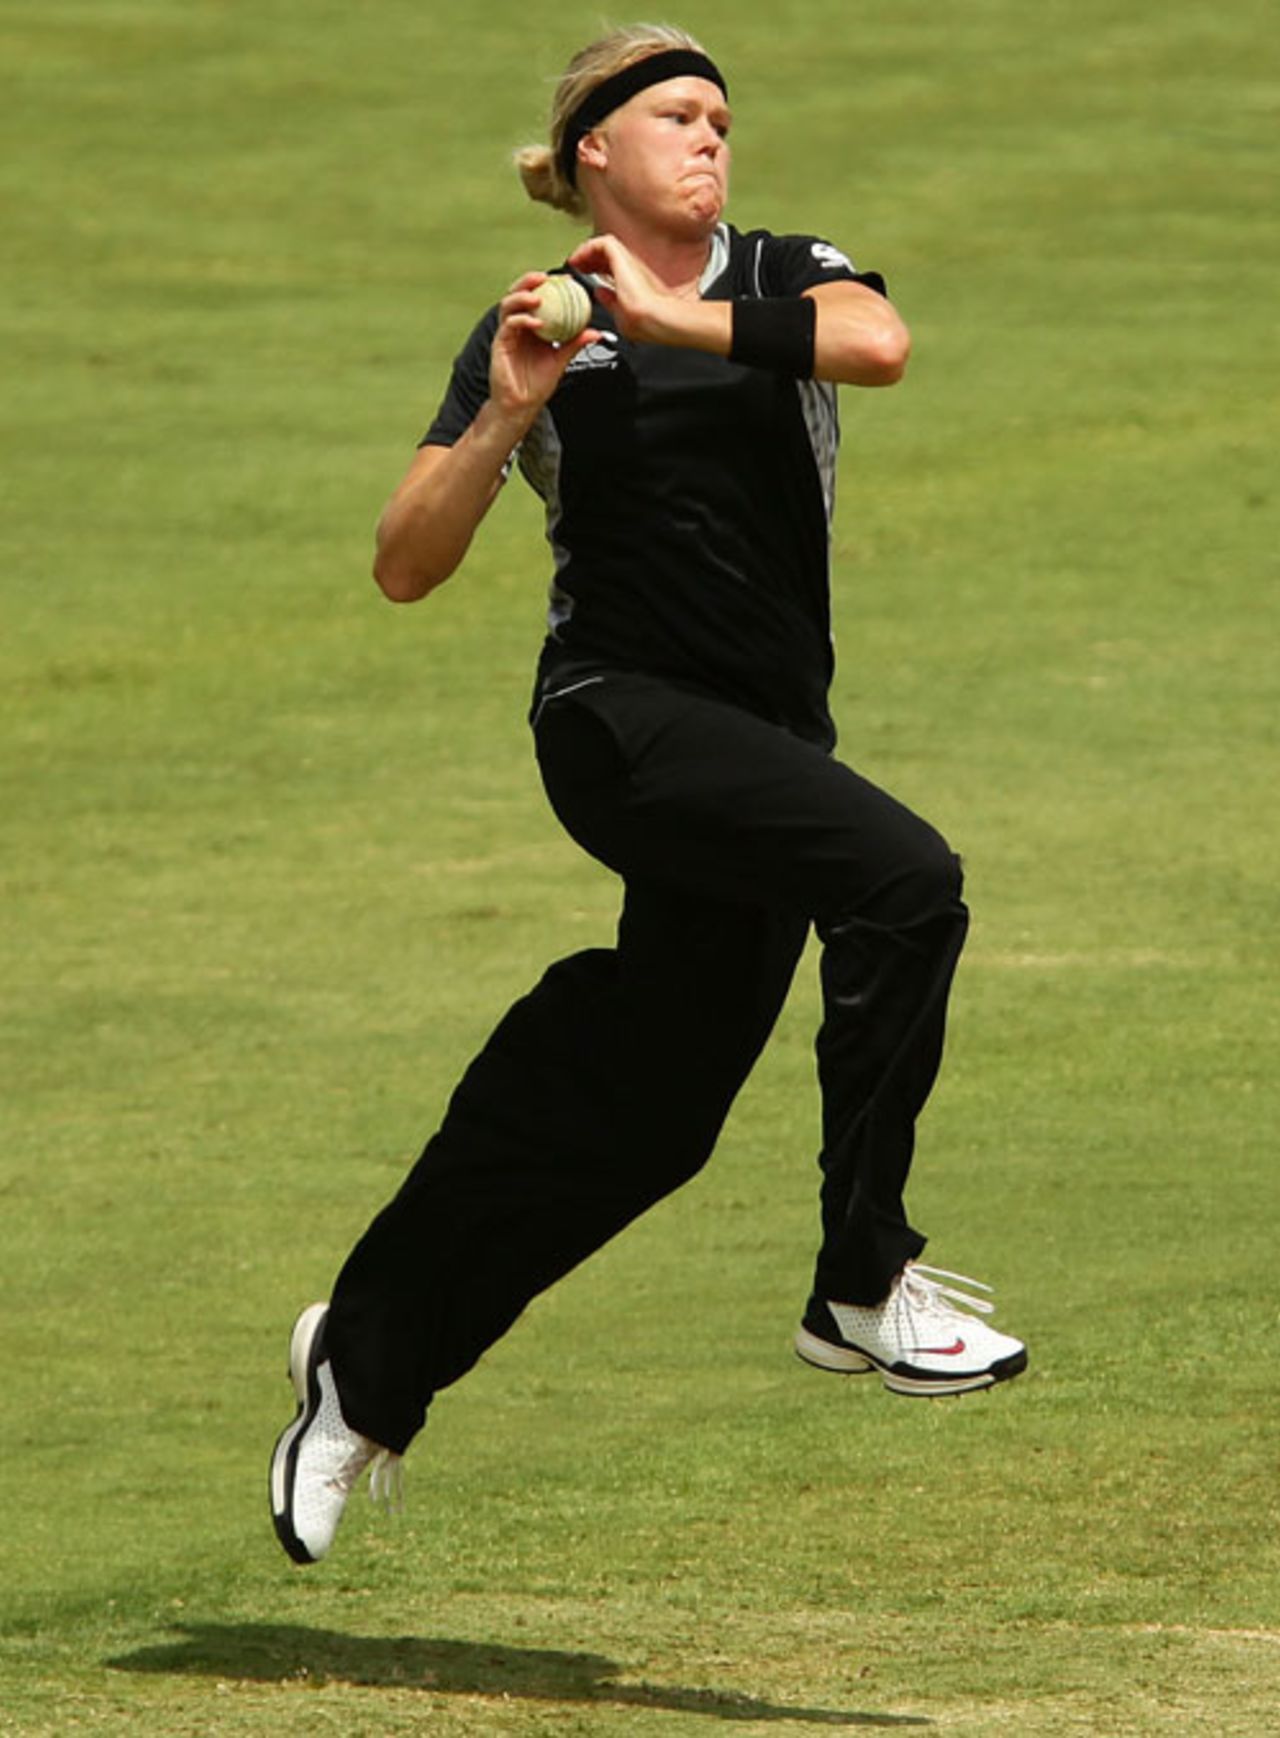 Kate Pulford helped finish off the innings with 2 for 33, Australia v New Zealand, 1st ODI, Rose Bowl Series, Adelaide, 10 February, 2010